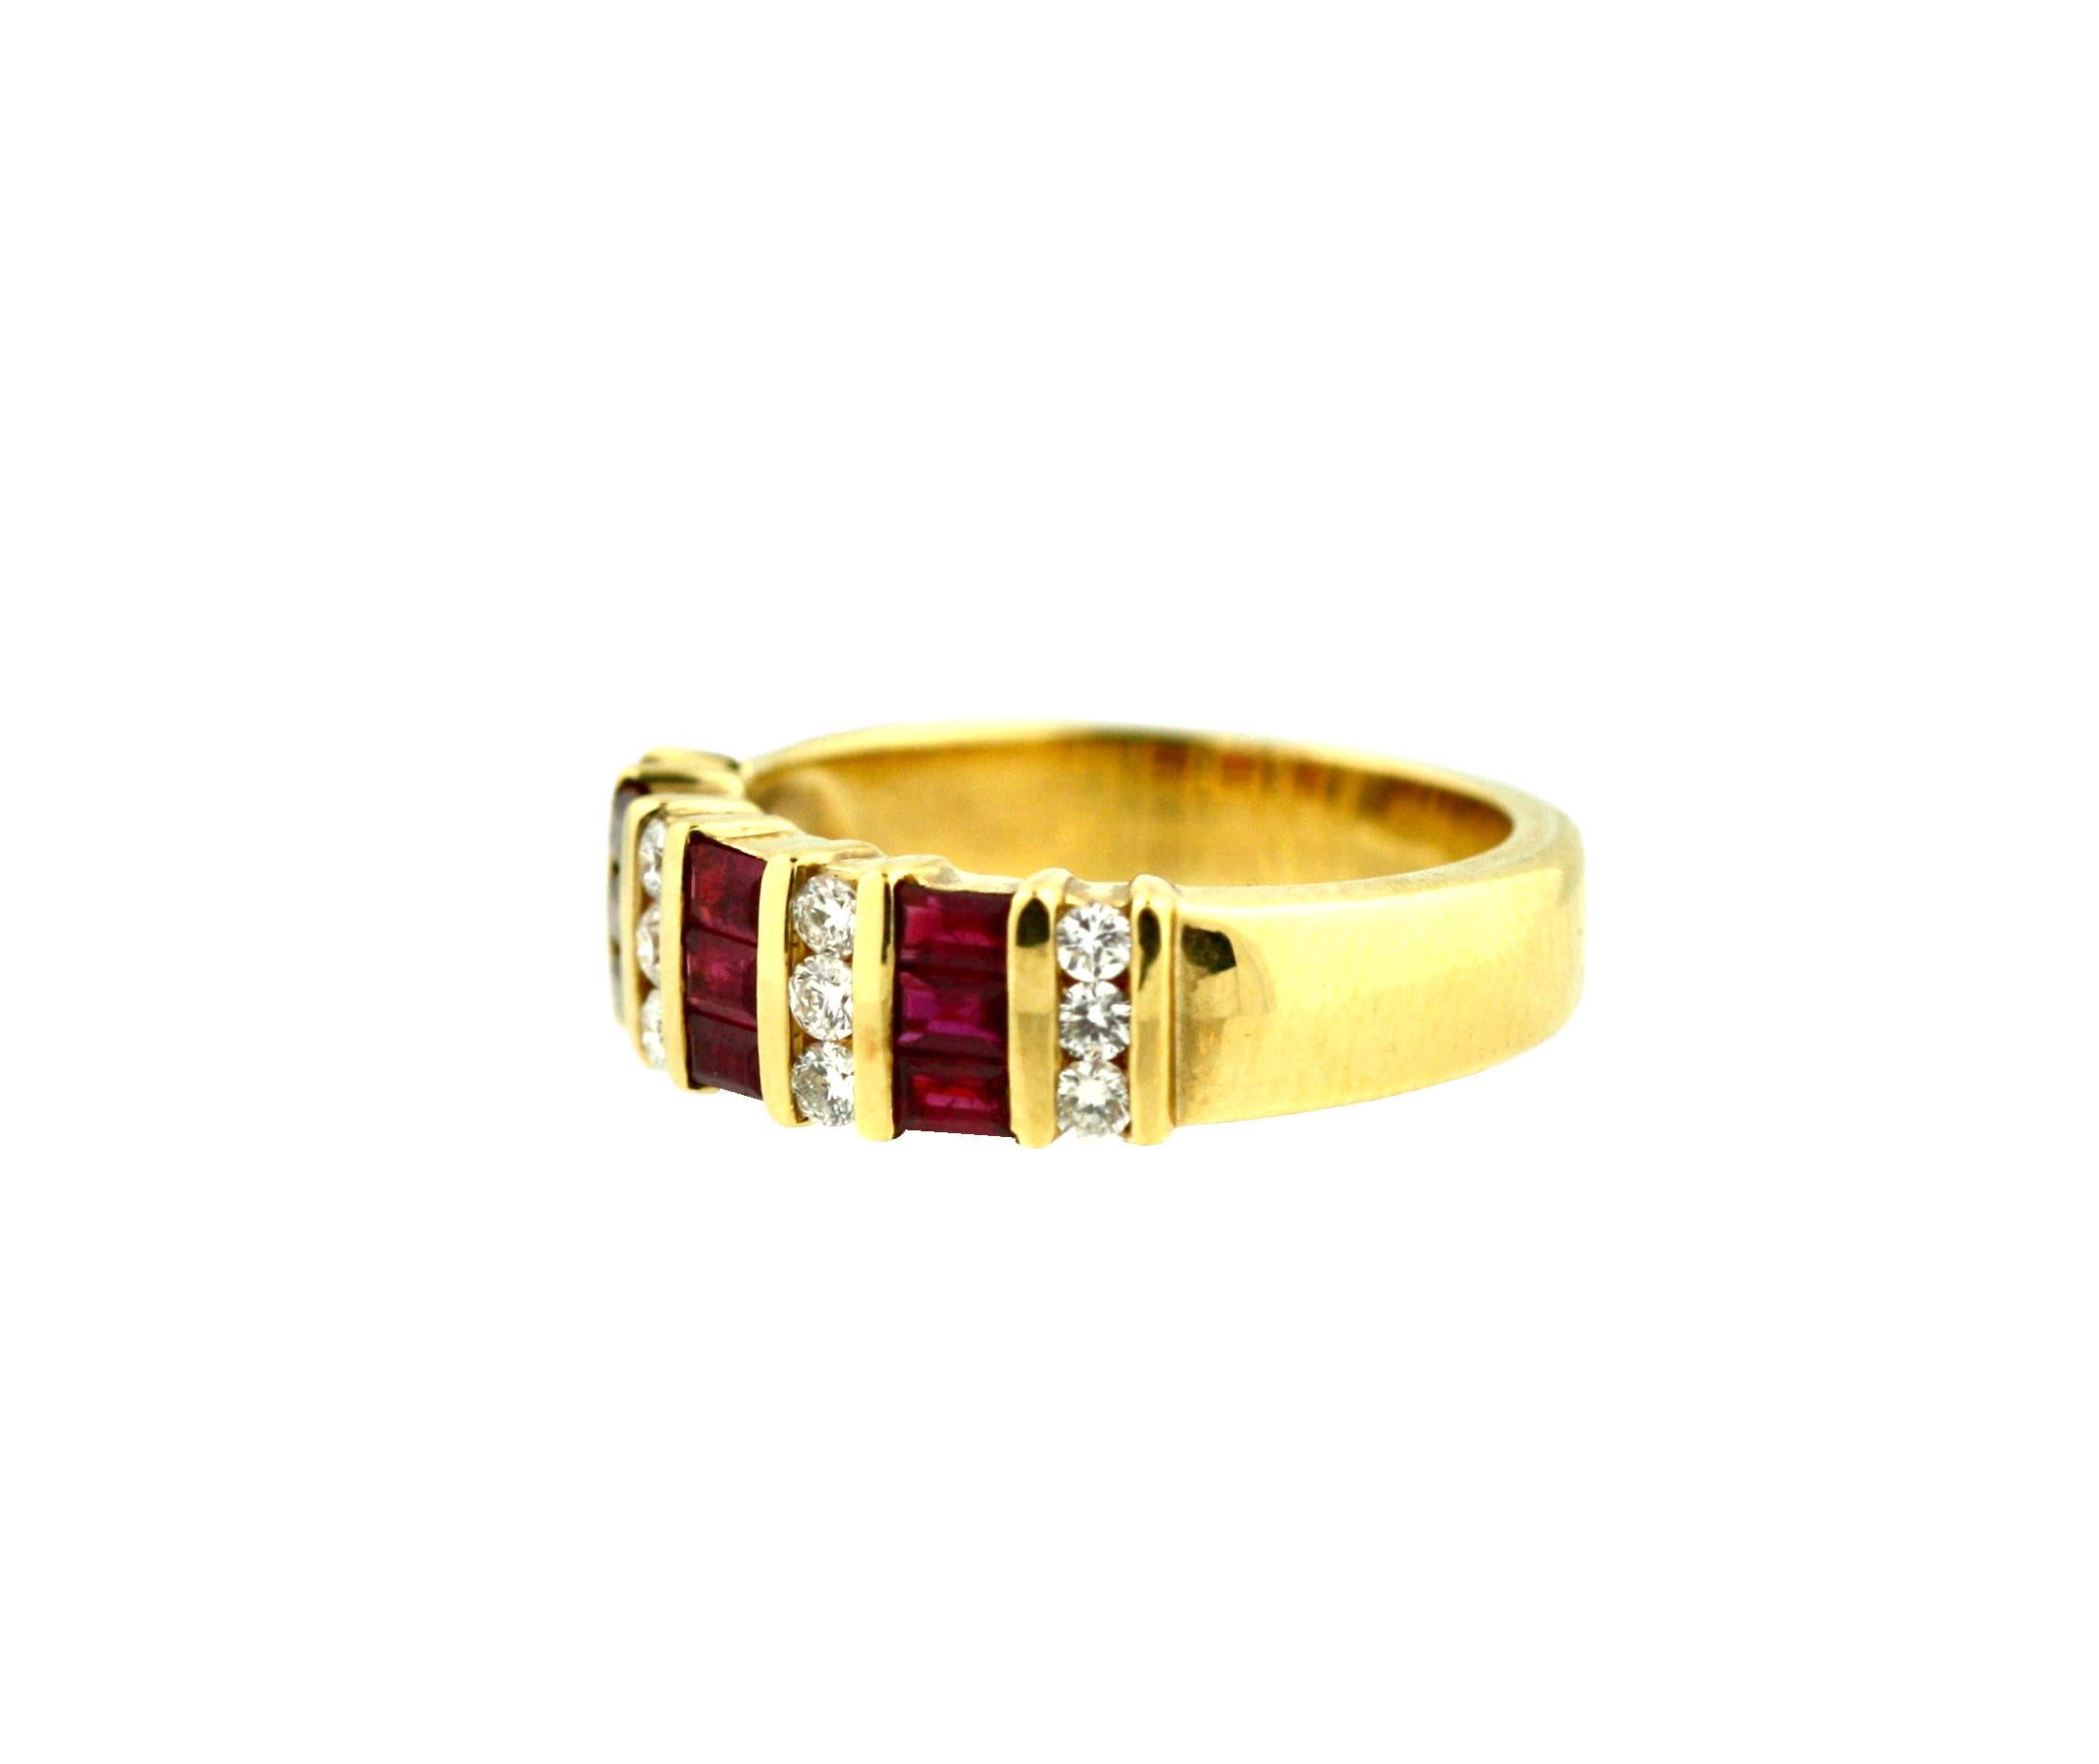 18 karat yellow gold, Ruby and Diamond ring
Of full eternity design, set with rubies and brilliant-cut diamonds, size 6 1/4
